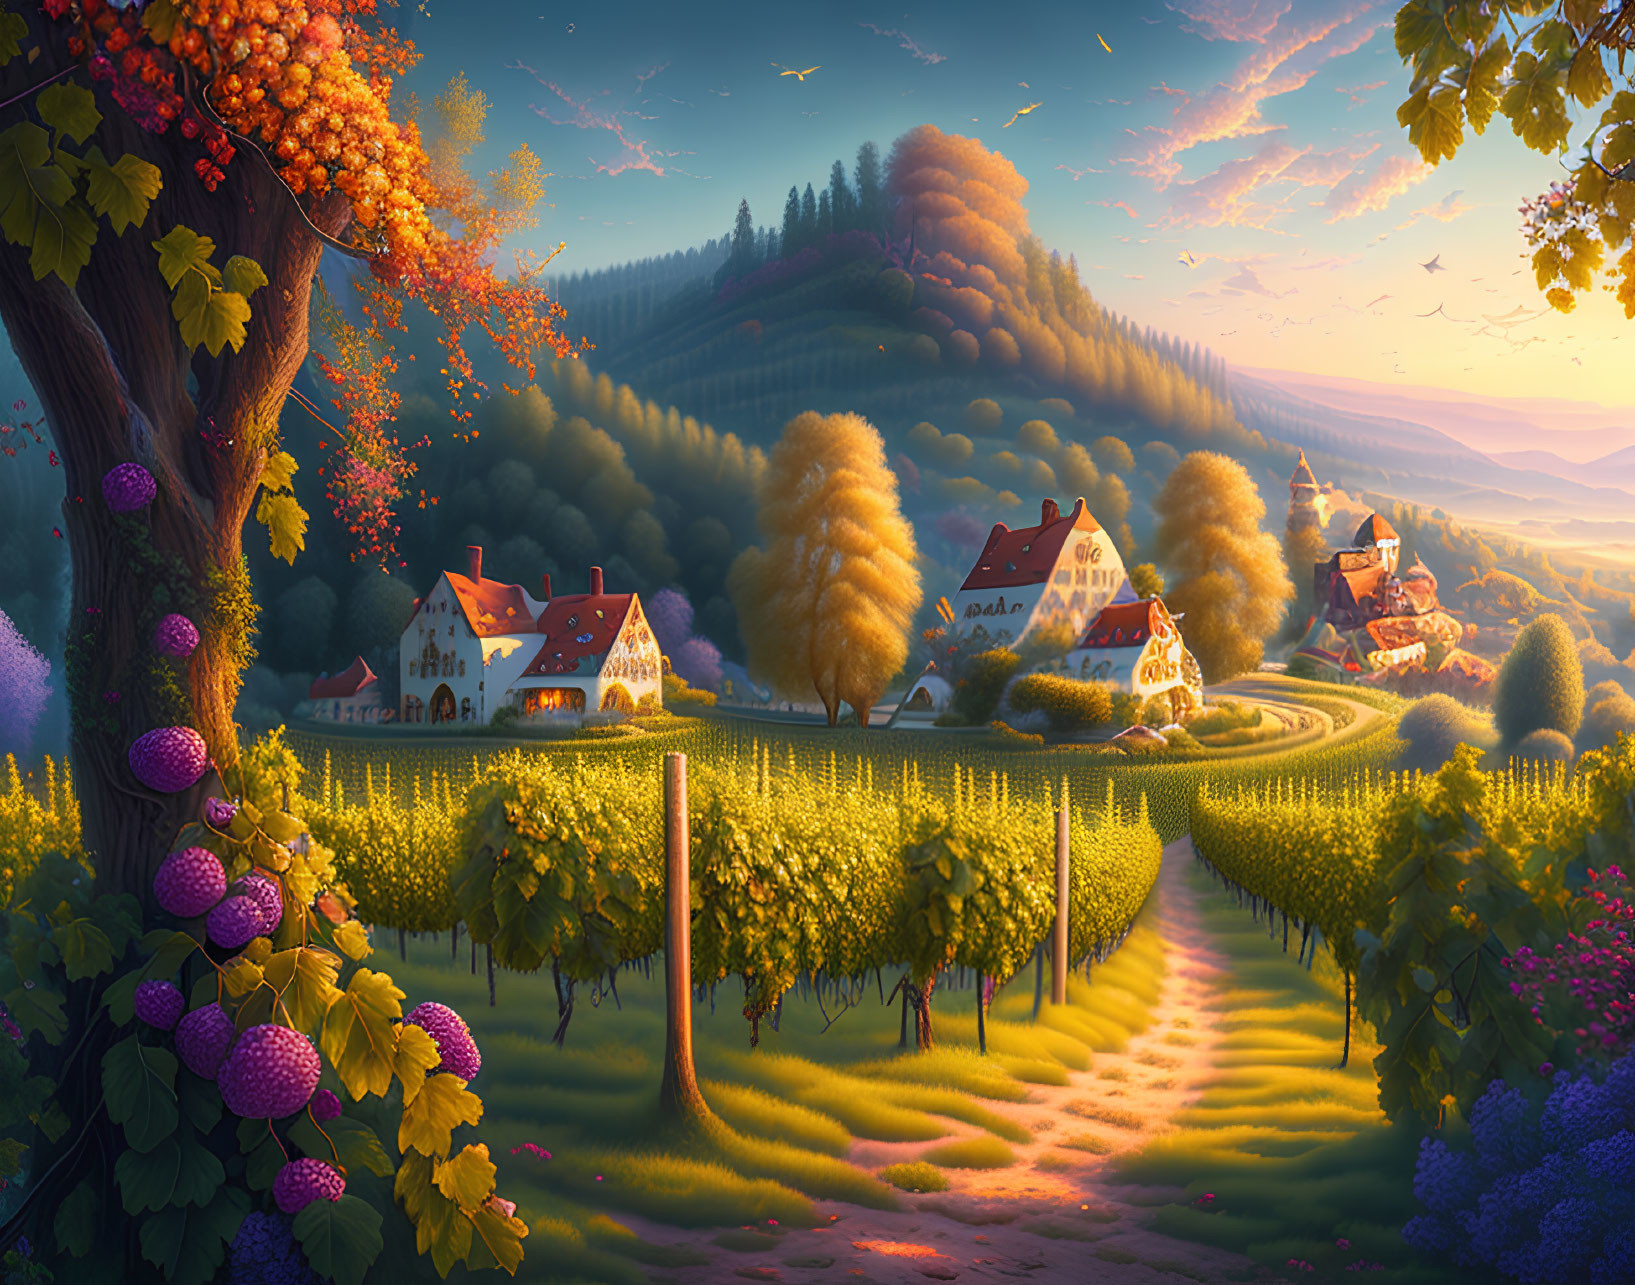 Scenic autumn village with vineyards, cozy homes, and sunrise